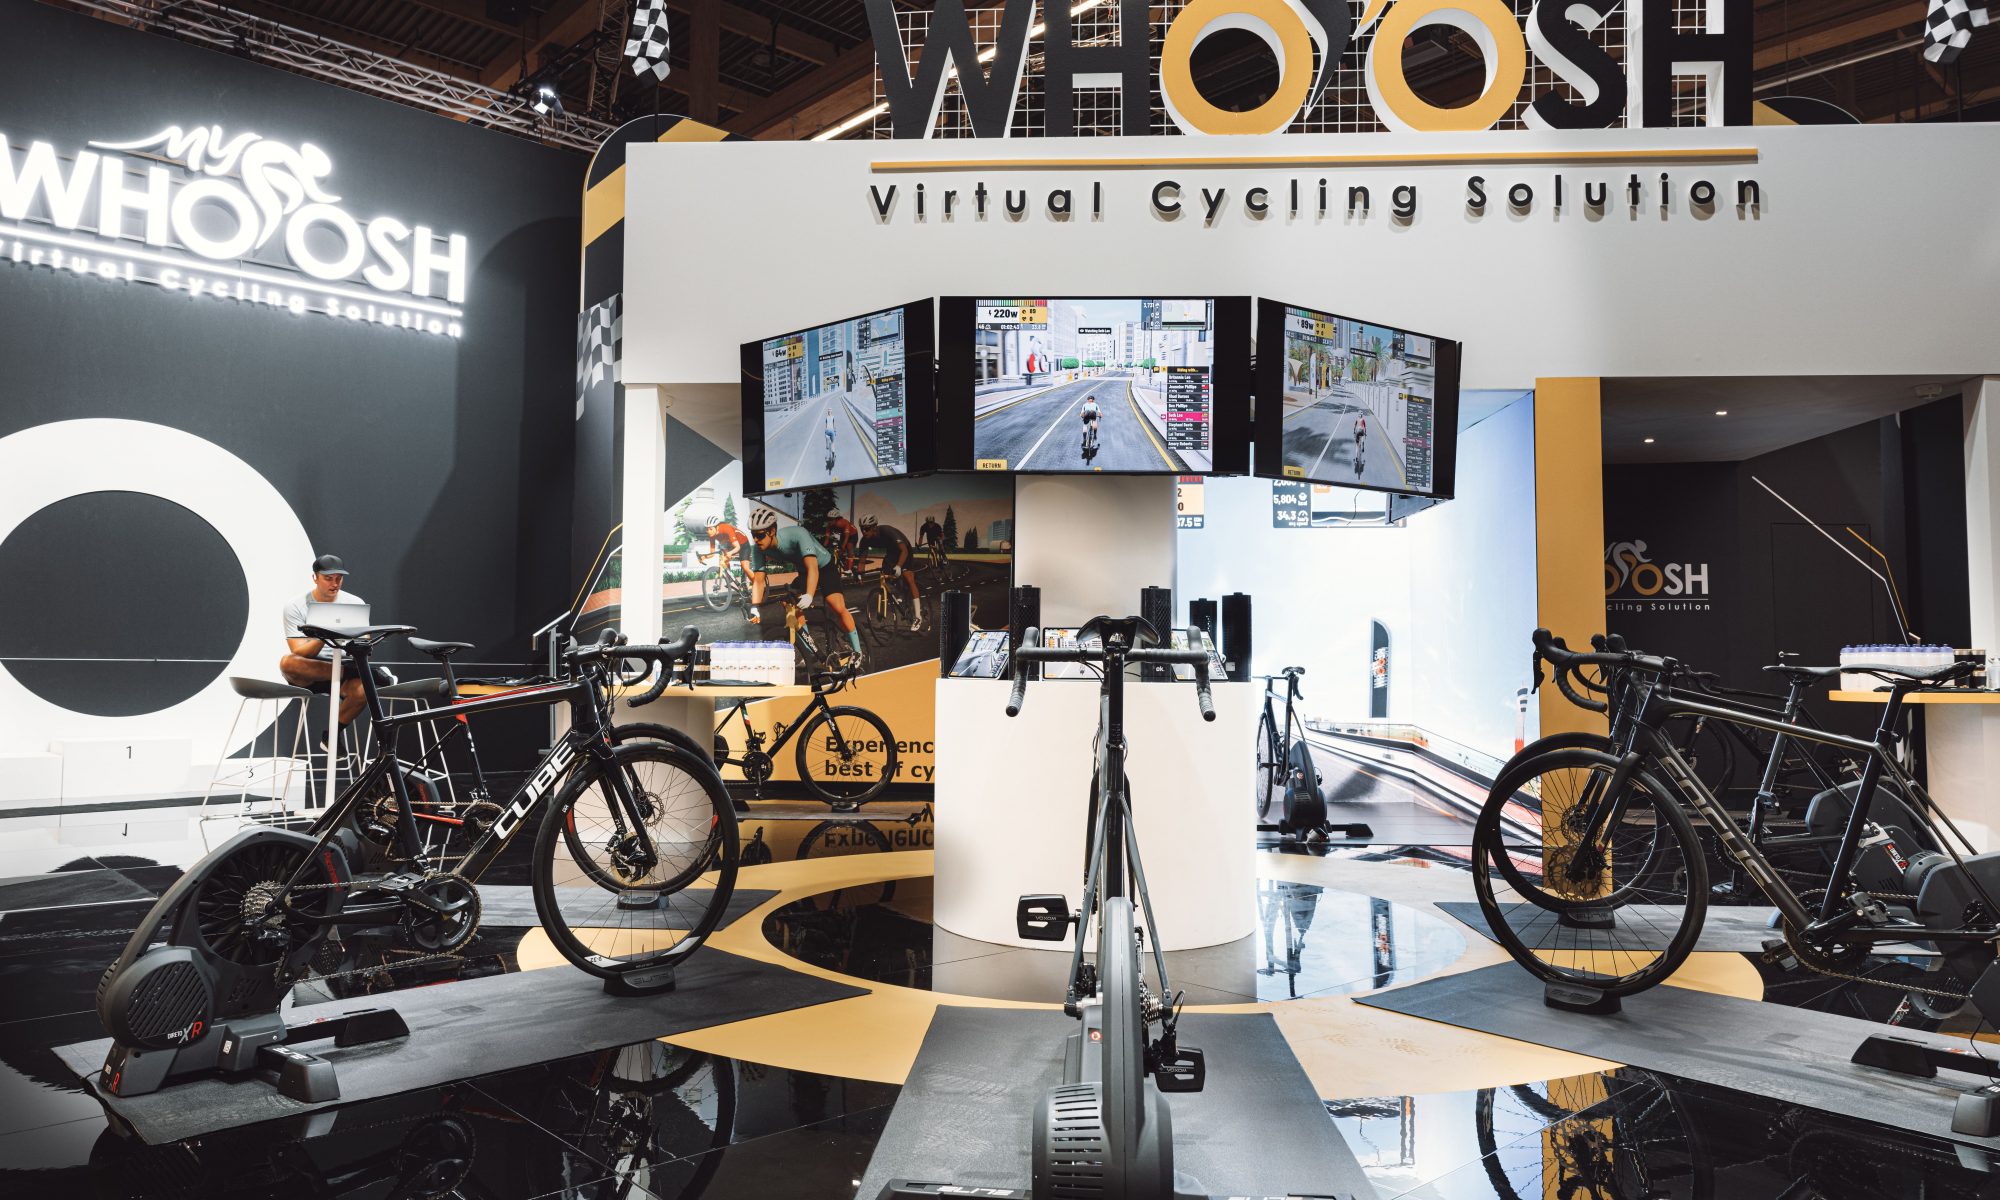 MyWhoosh Exhibition Stand | Eurobike